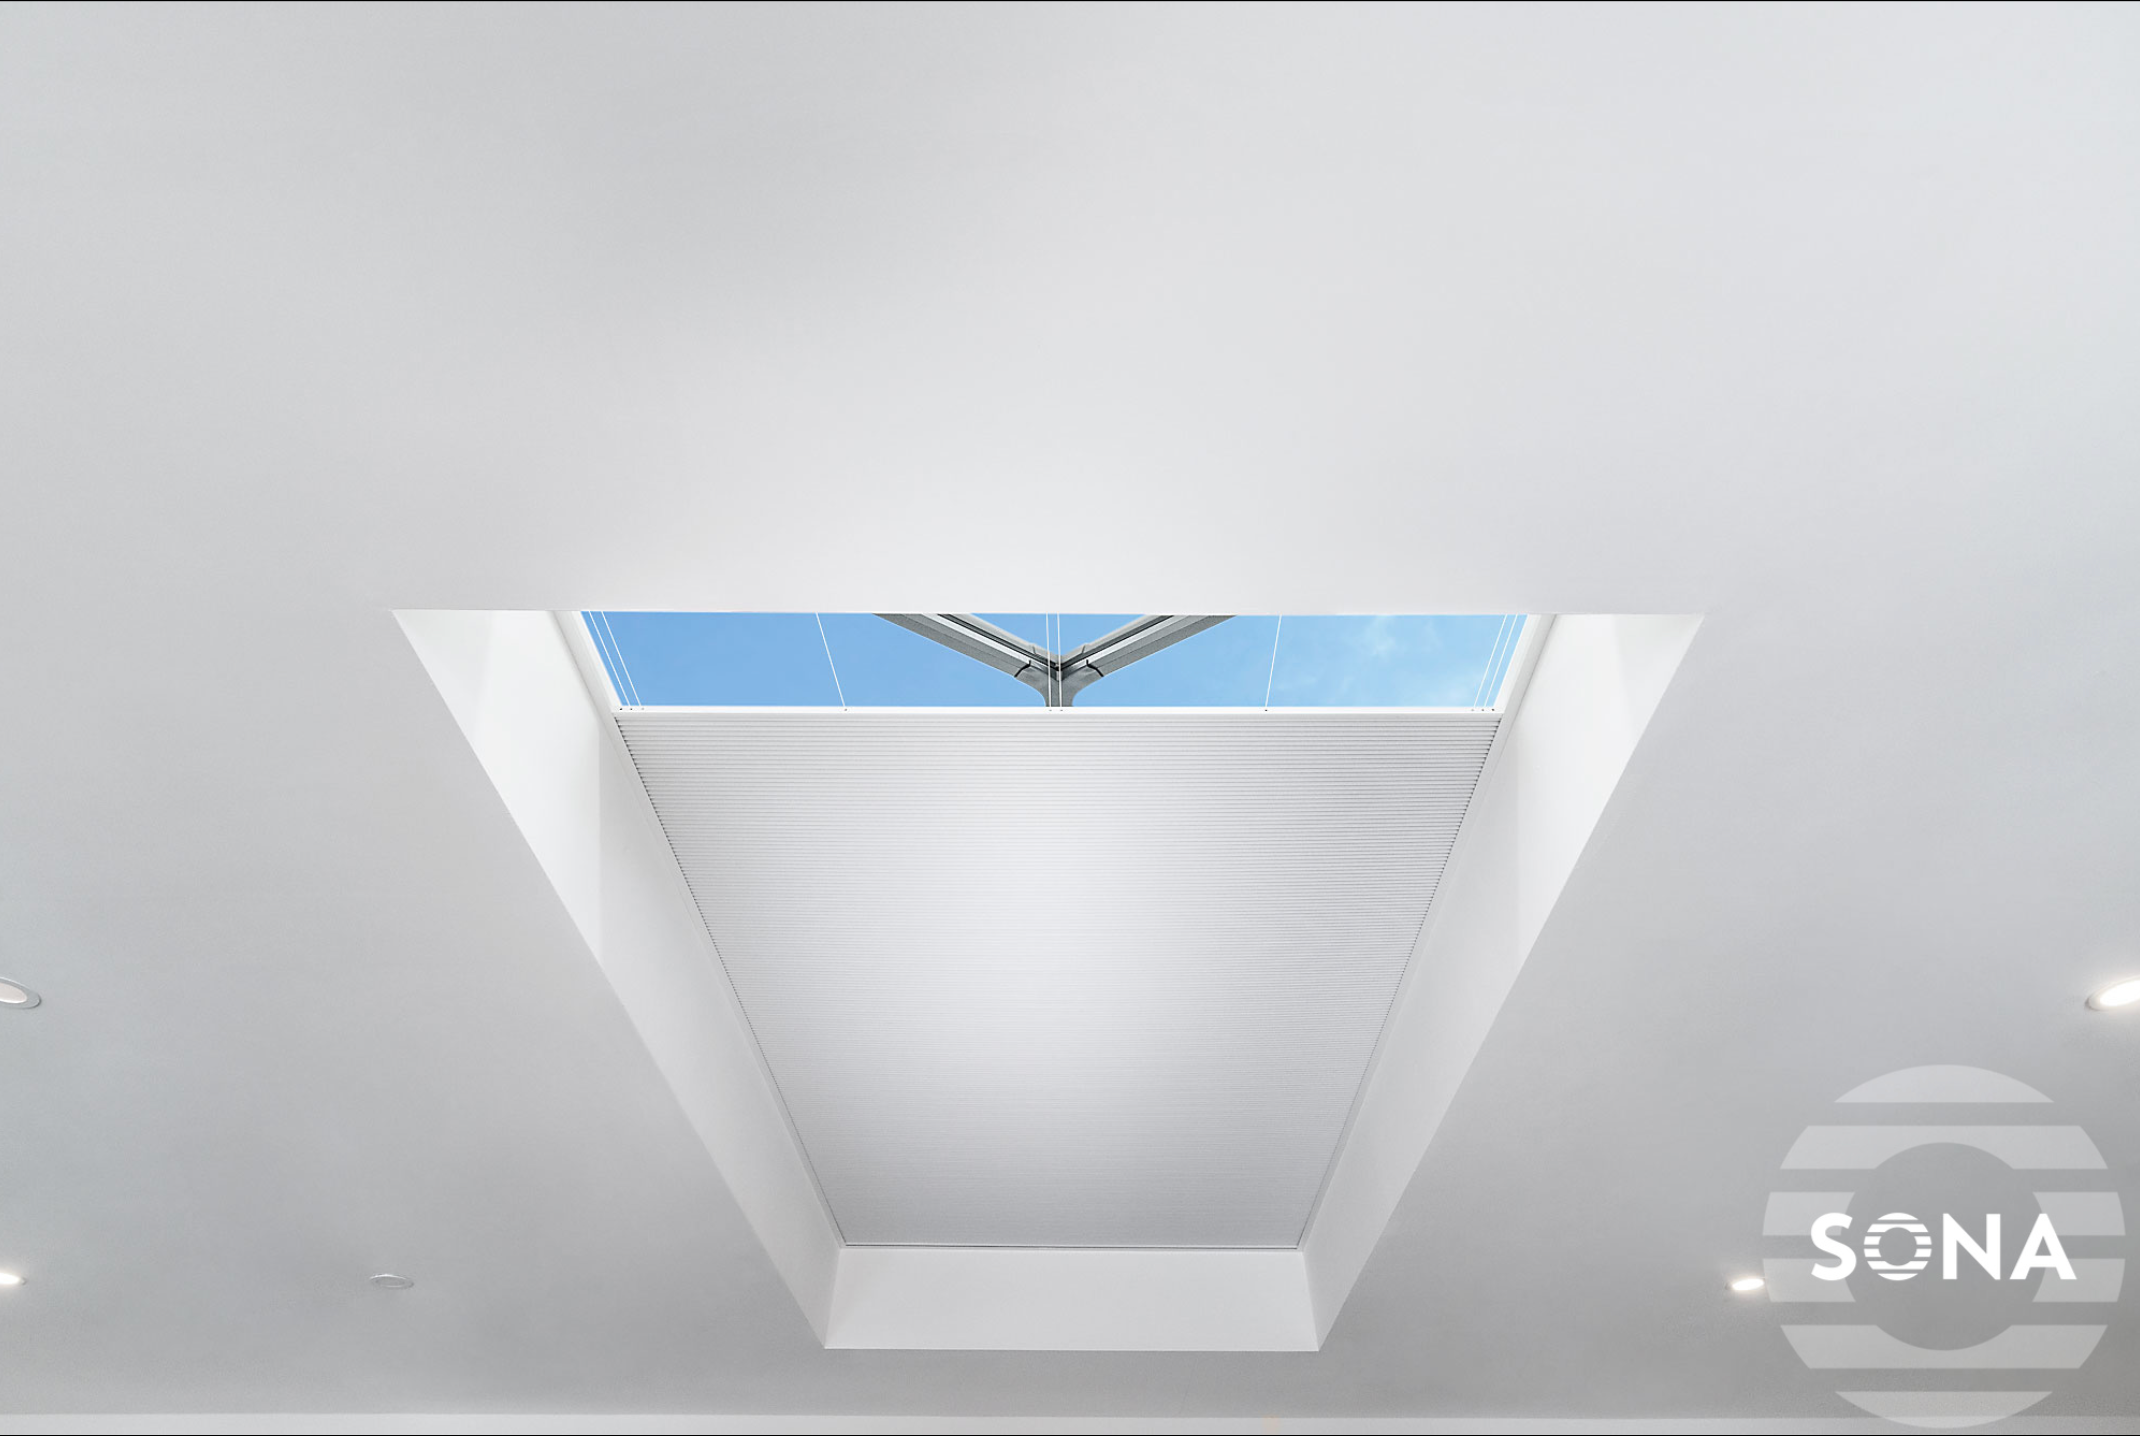 Electric Blinds for Flat & Pitched Roof Skylight 1500x3000mm